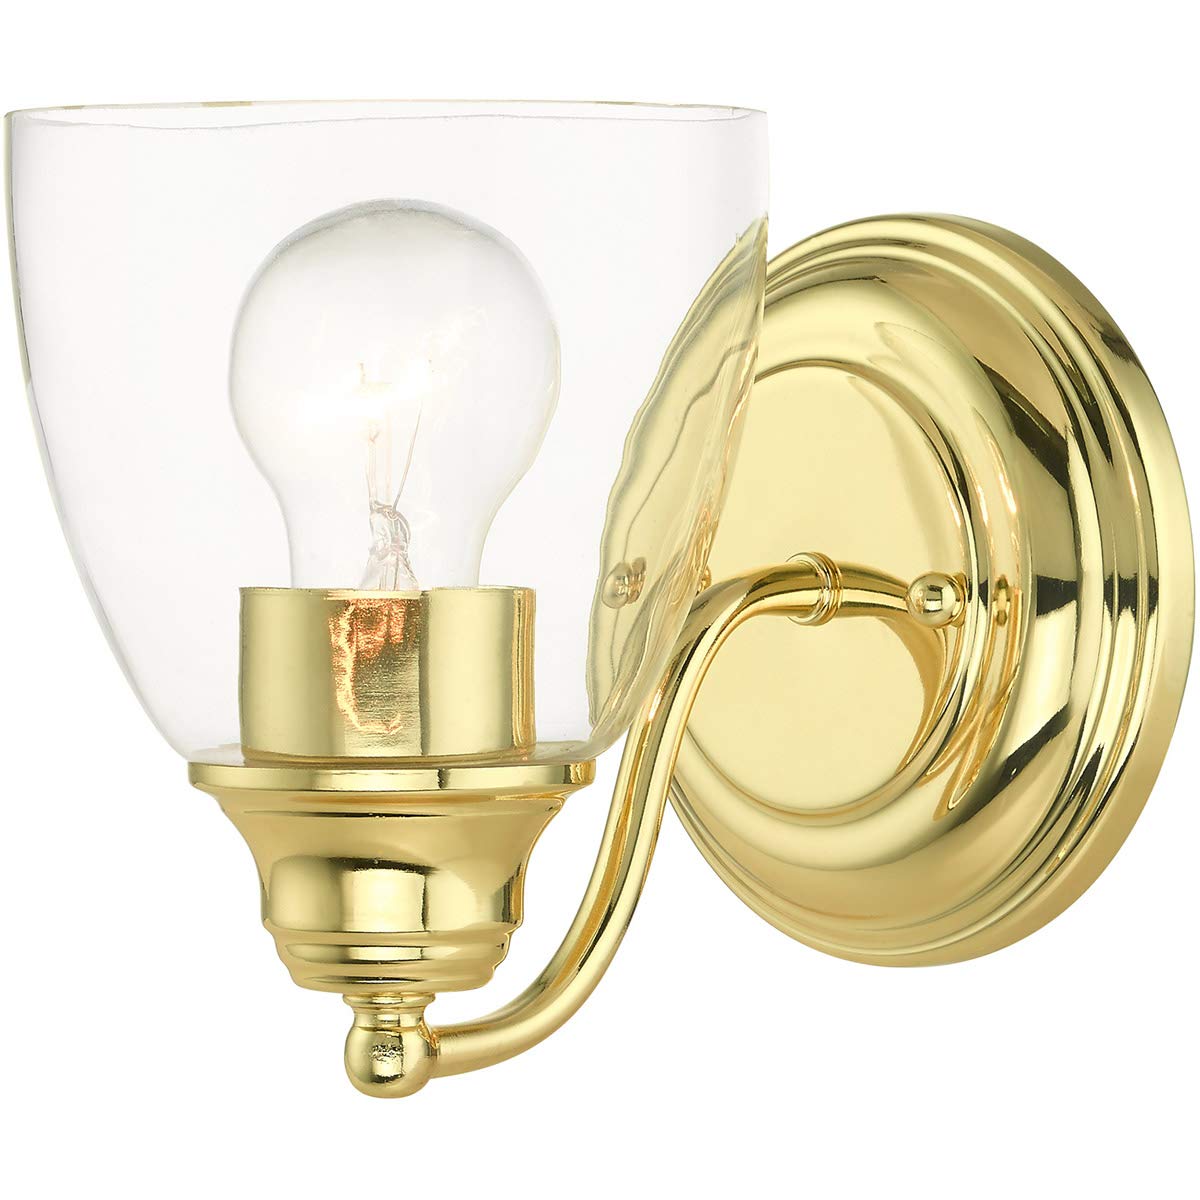 Livex Lighting 15131-02 Montgomery Collection 1-Light Bathroom Vanity Light with Clear Glass, Polished Brass, 5.38 x 7